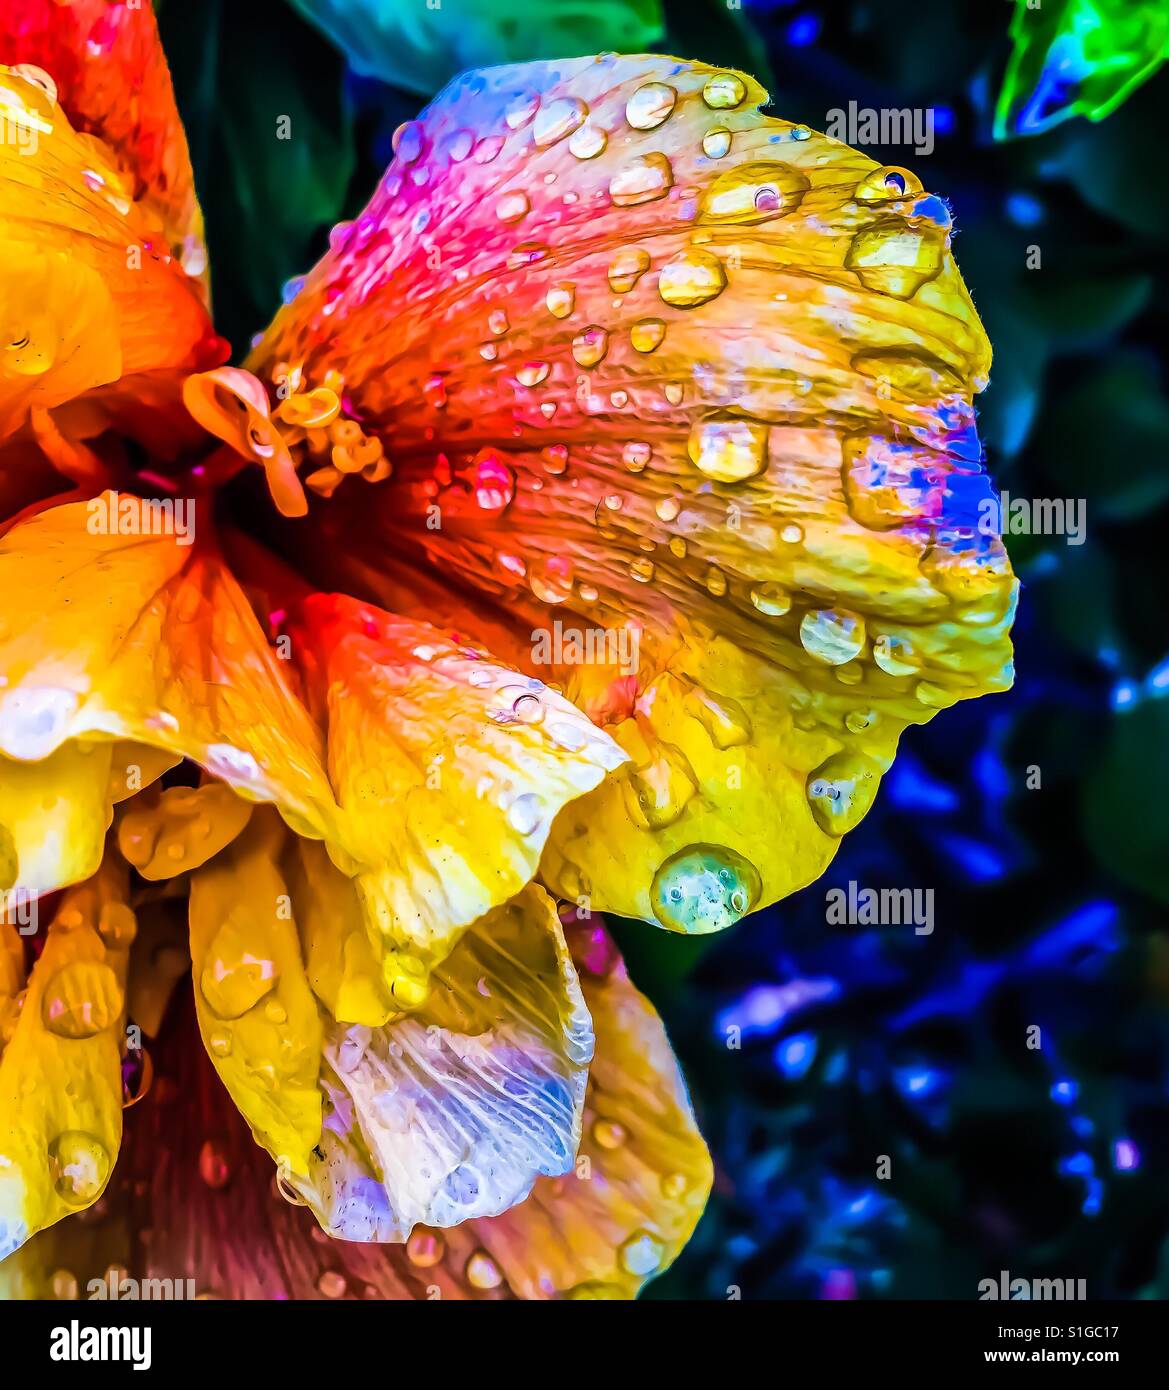 Rainbow flower with drops of water on petals - colorful diversity Stock Photo